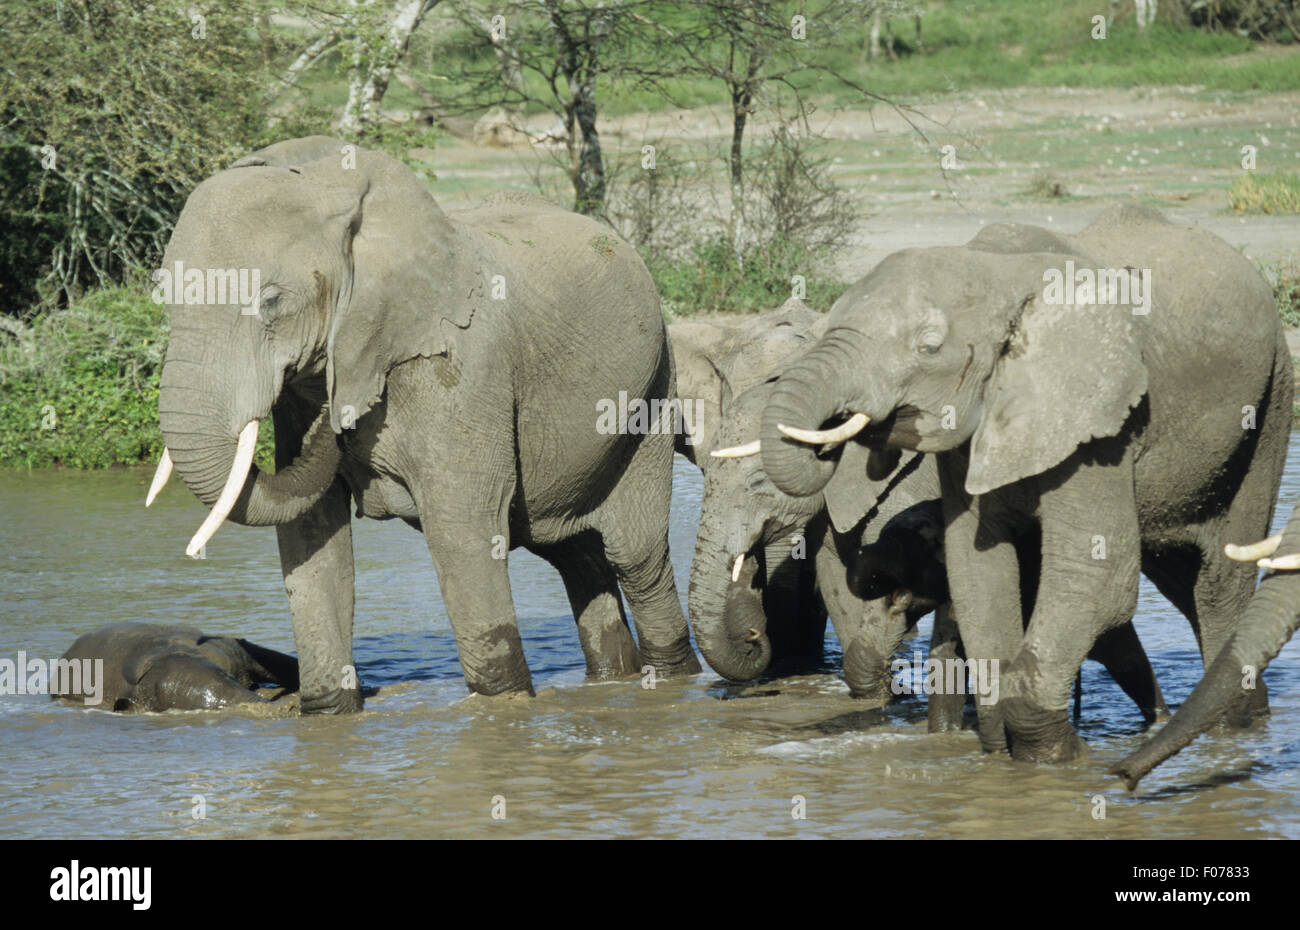 African Elephant group herd standing drinking together in shallow river water Stock Photo